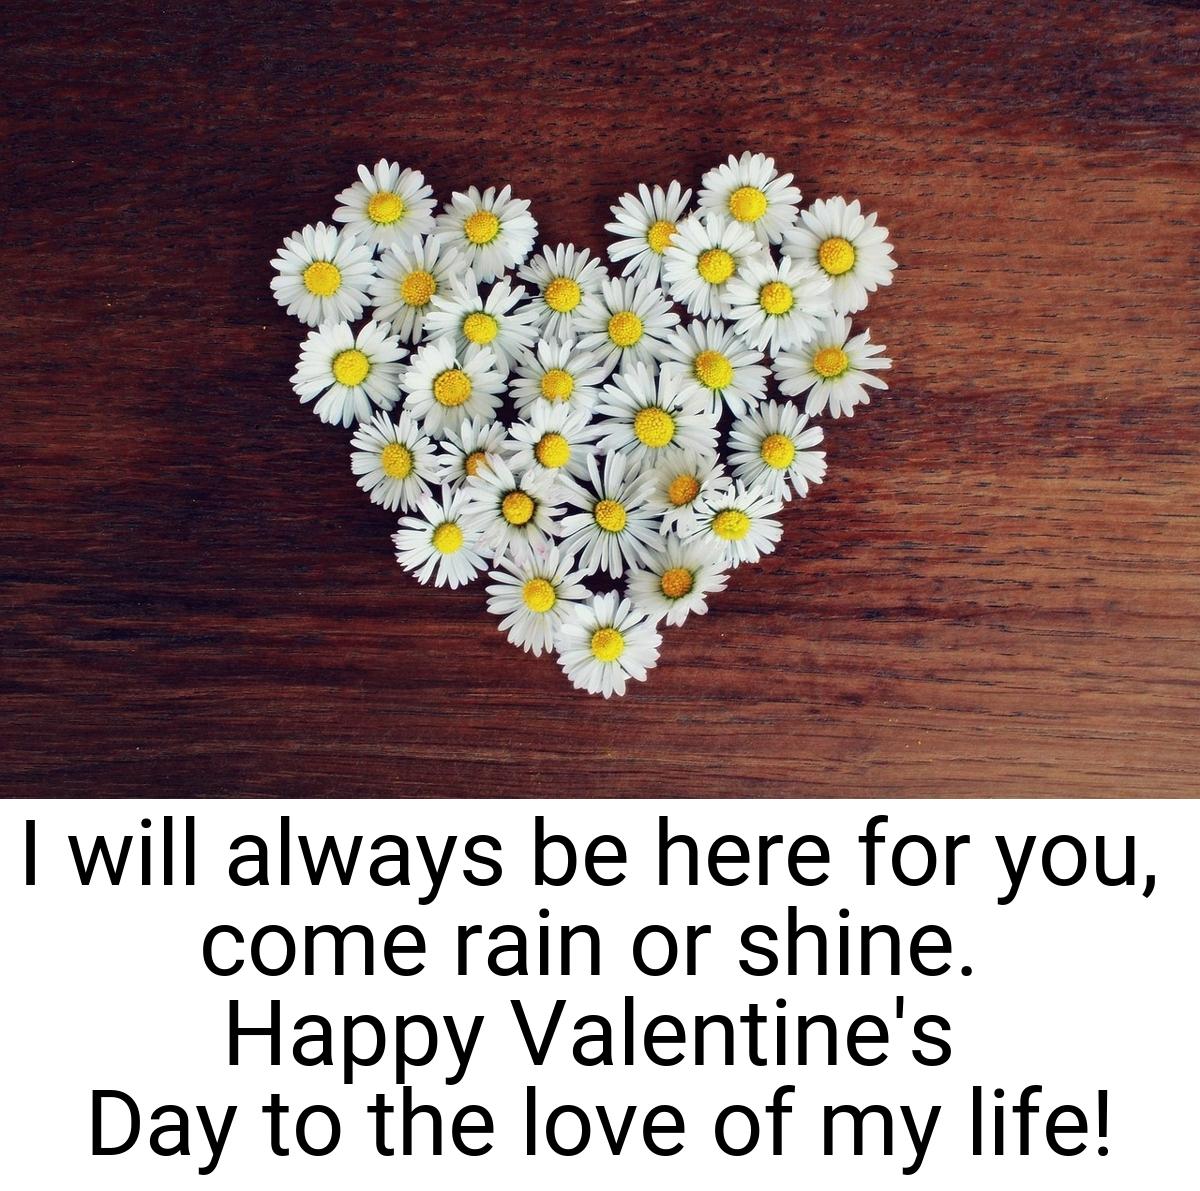 I will always be here for you, come rain or shine. Happy